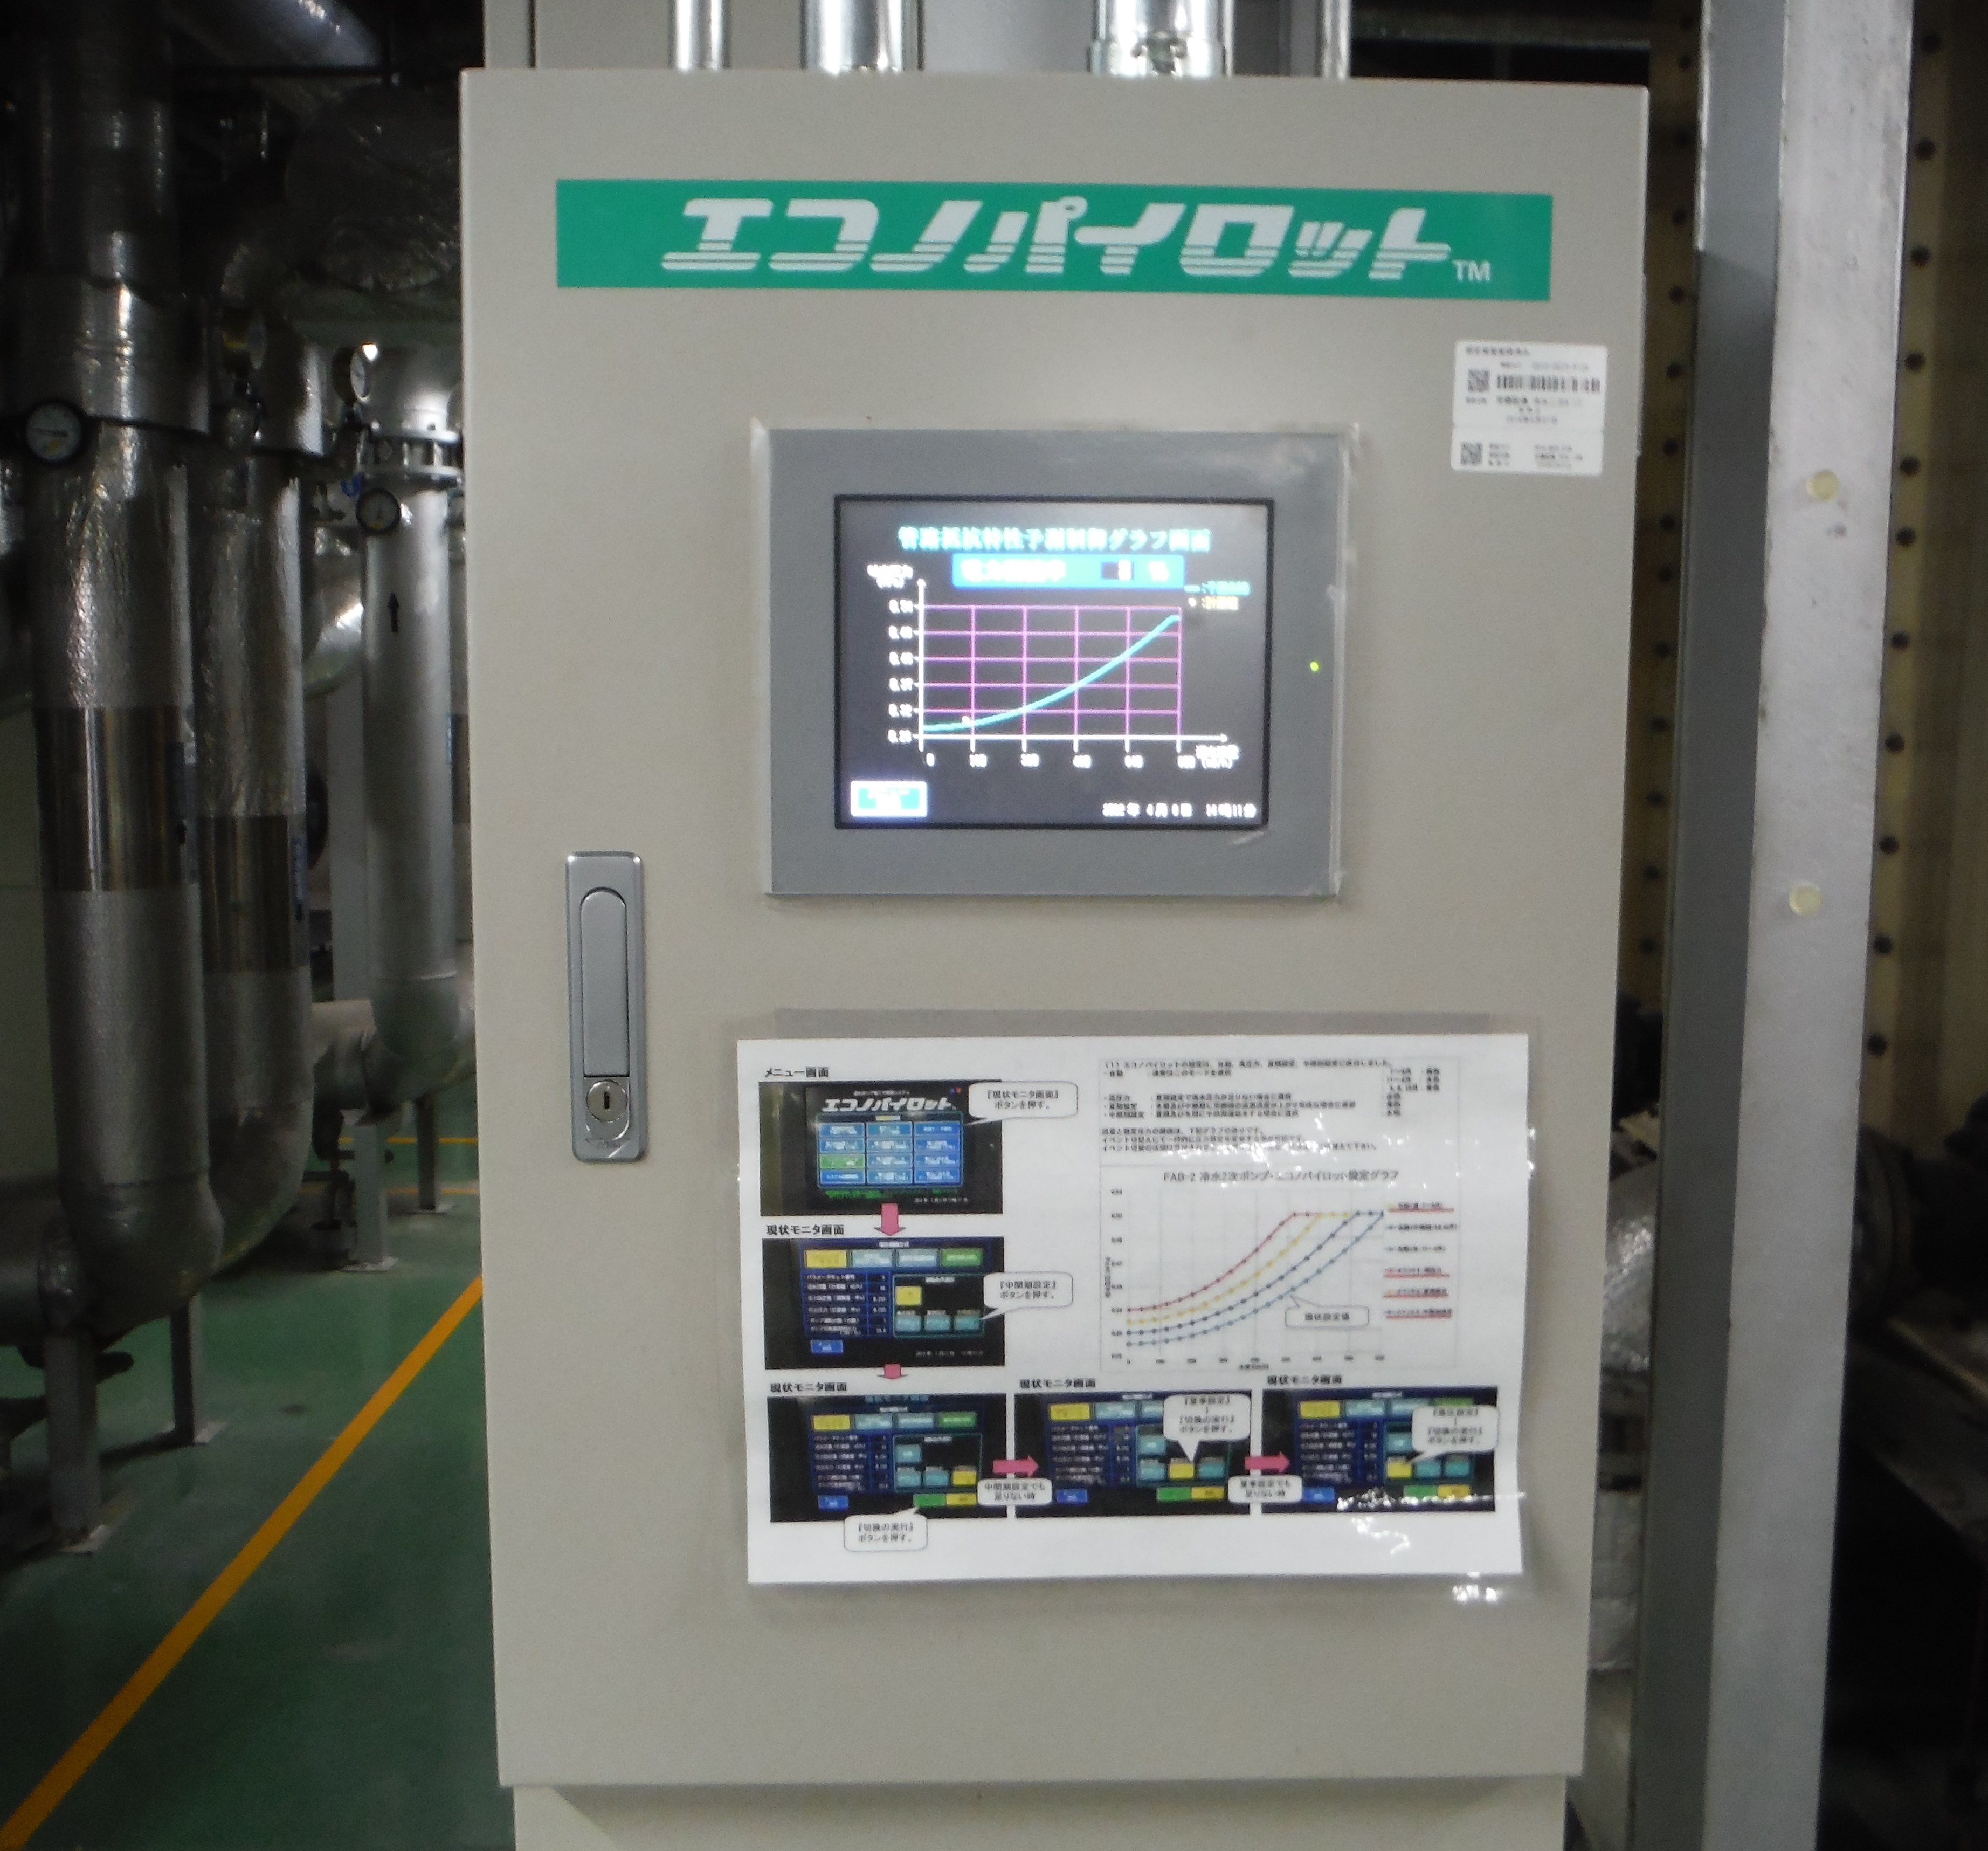 Chilled water supply control system